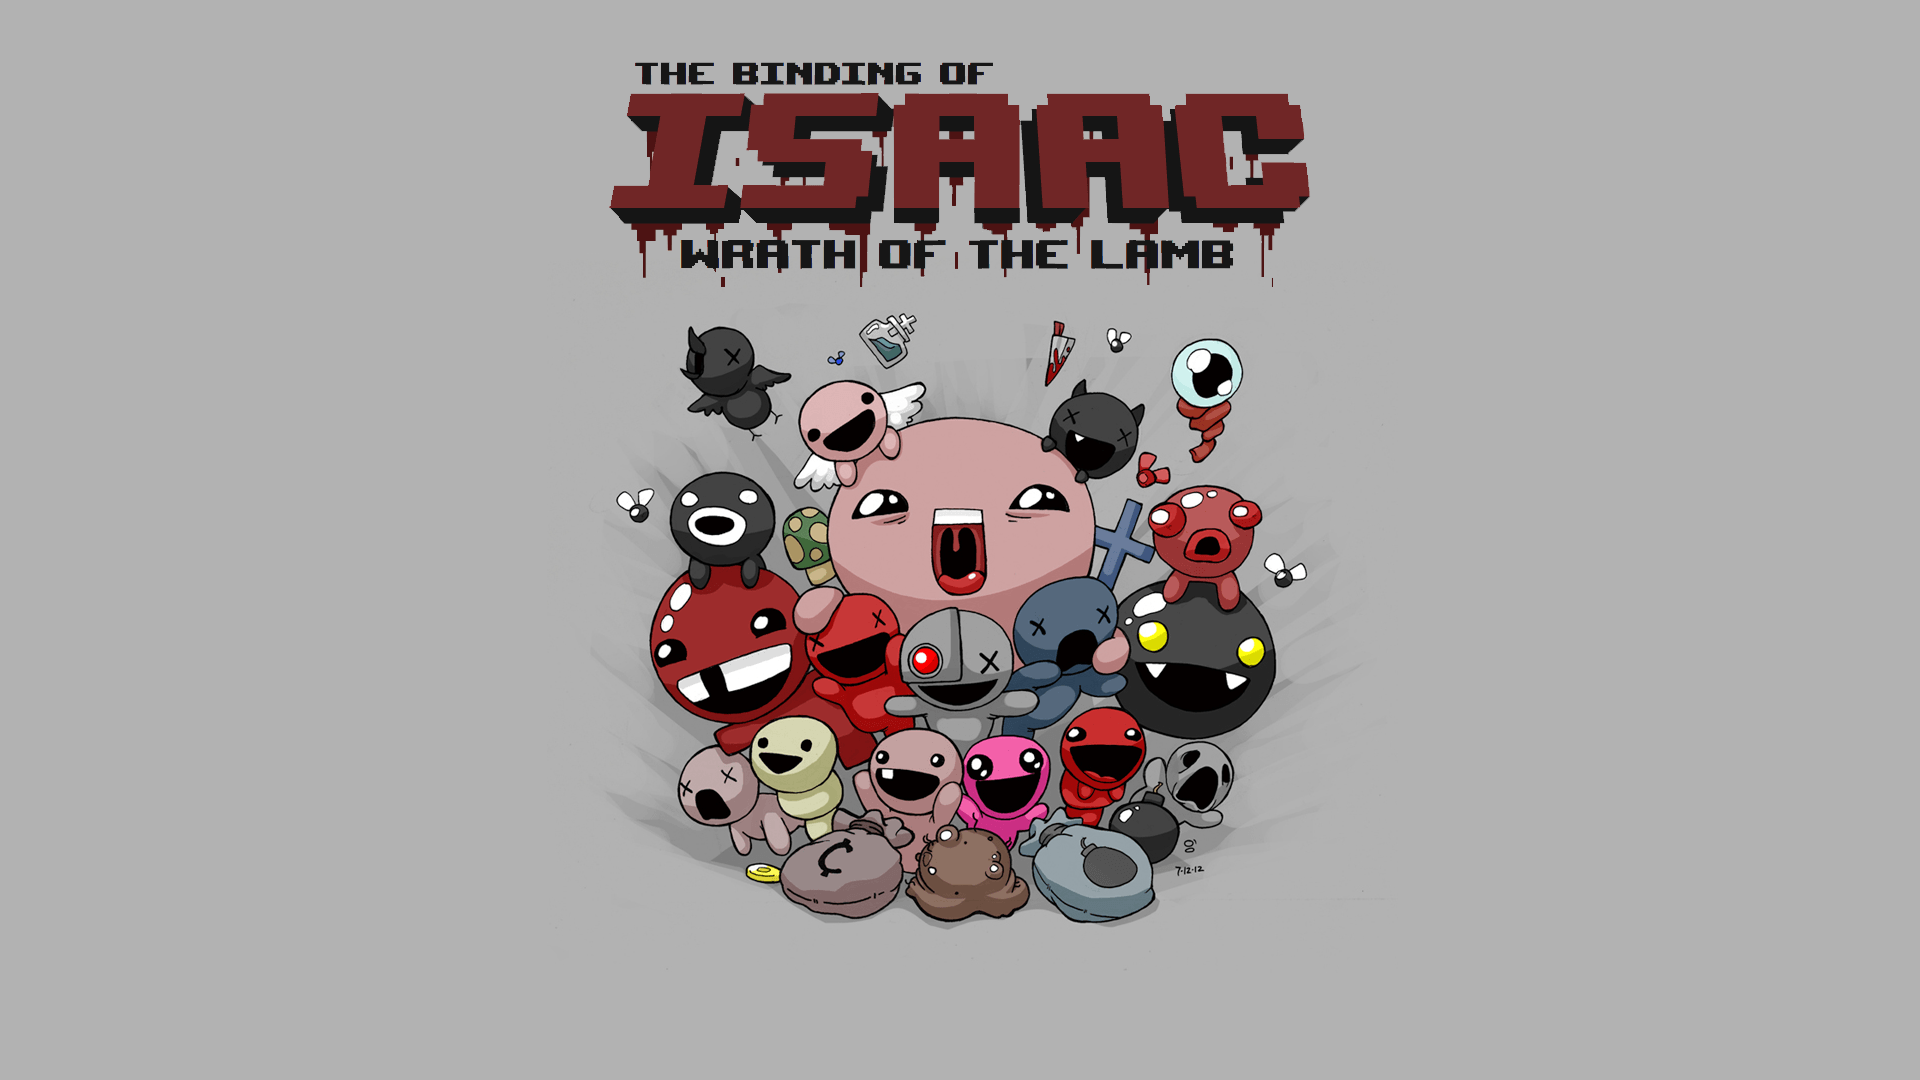 Binding of Isaac Wallpaper I made with a better resolution